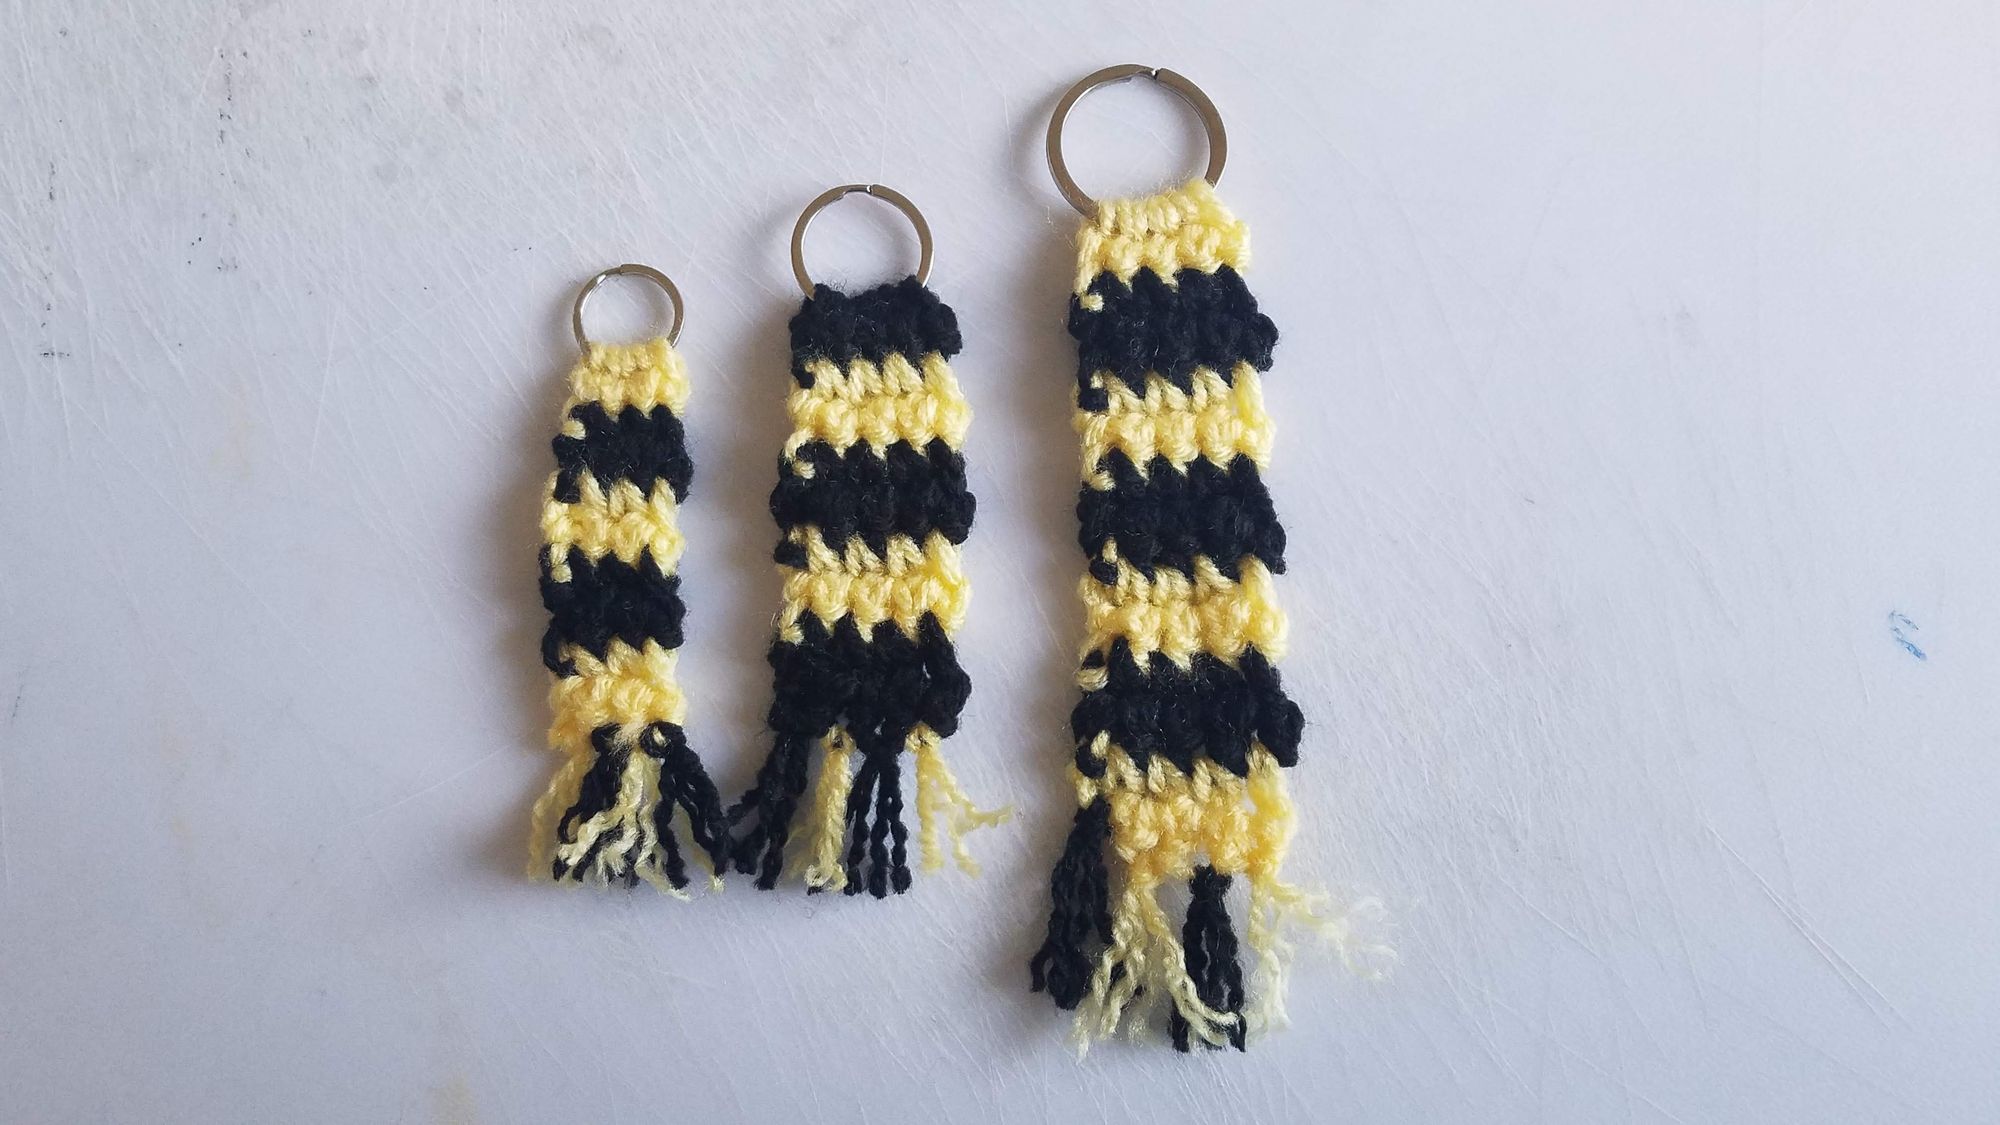 Project Hufflepuff House: Keychains